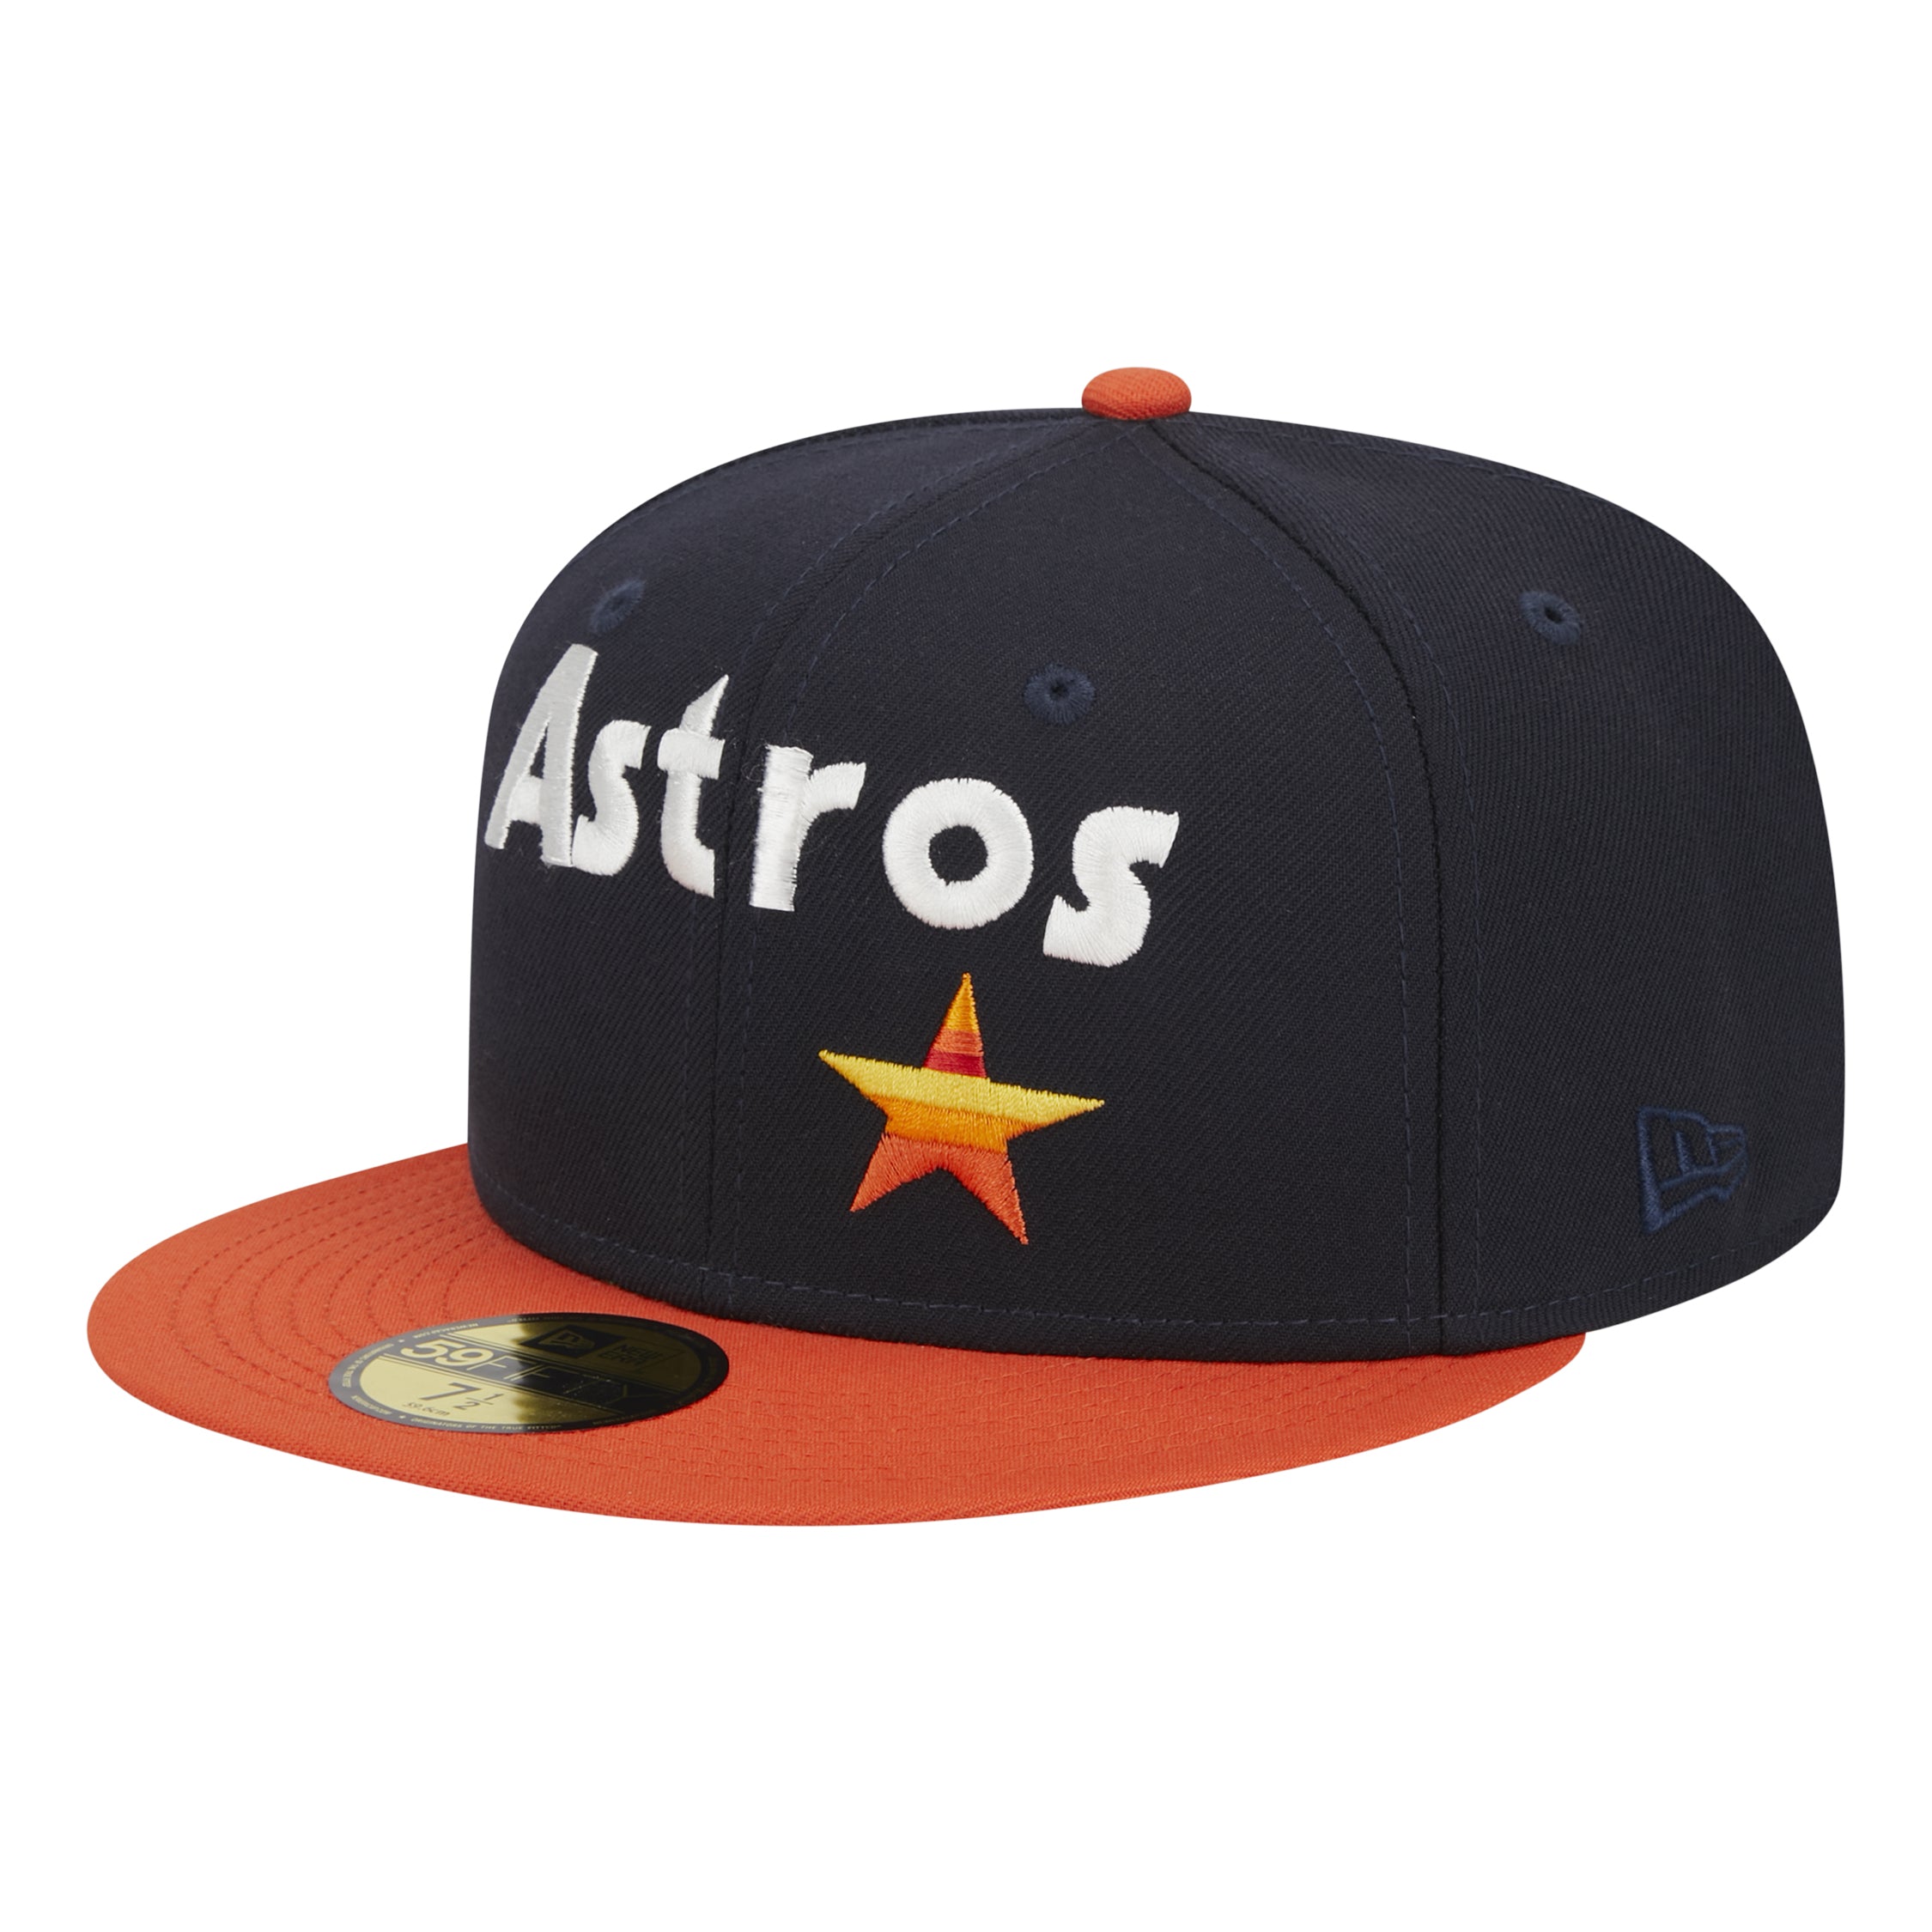 The Houston Astros Inauthenticate Throwback Jerseys 